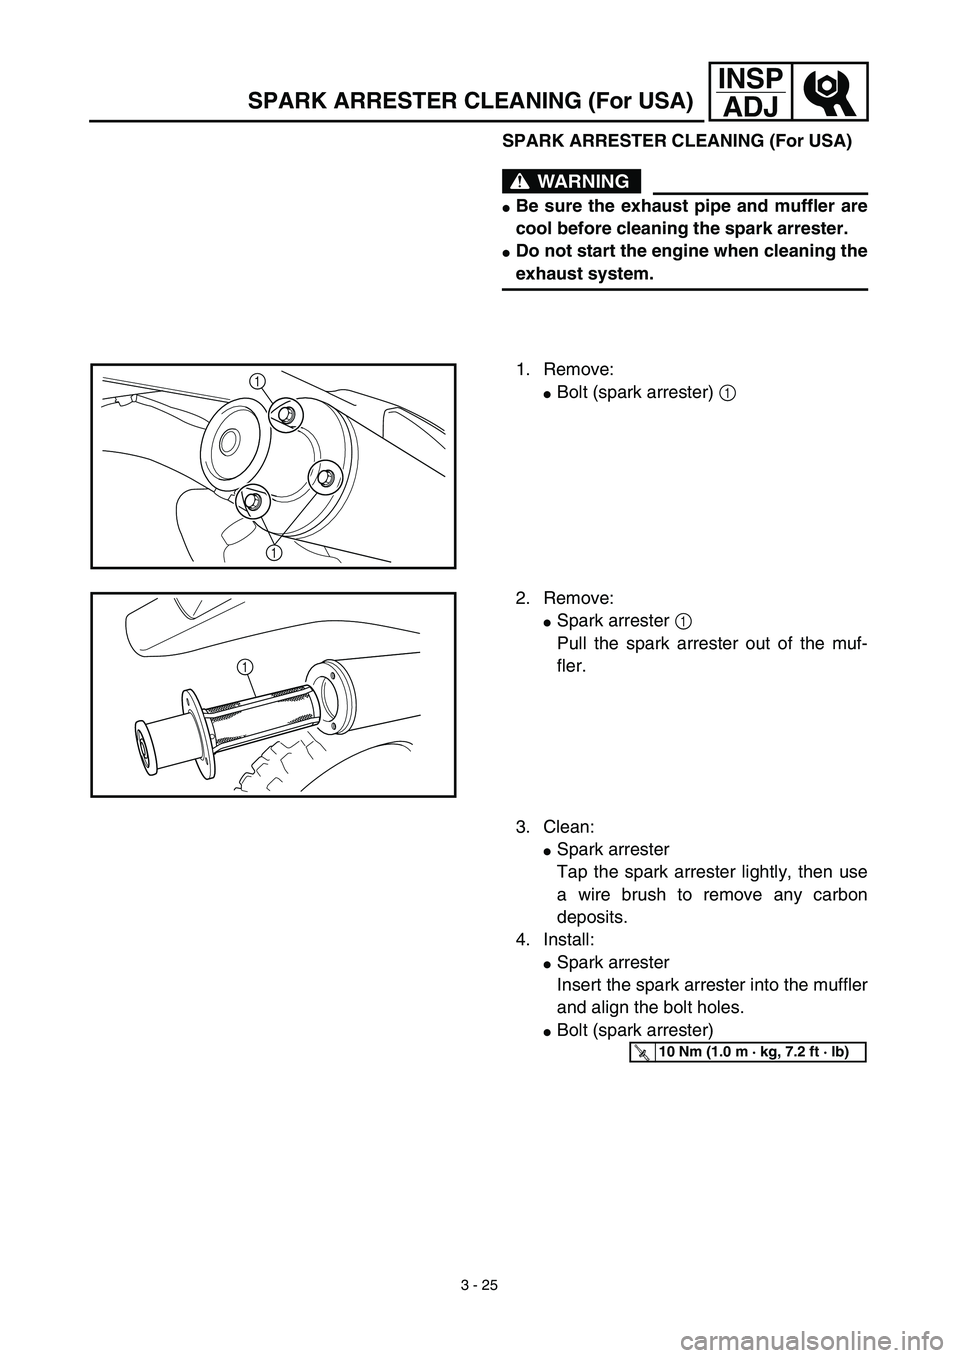 YAMAHA WR 450F 2003  Owners Manual 3 - 25
INSP
ADJ
SPARK ARRESTER CLEANING (For USA)
WARNING
Be sure the exhaust pipe and muffler are
cool before cleaning the spark arrester.
Do not start the engine when cleaning the
exhaust system.
